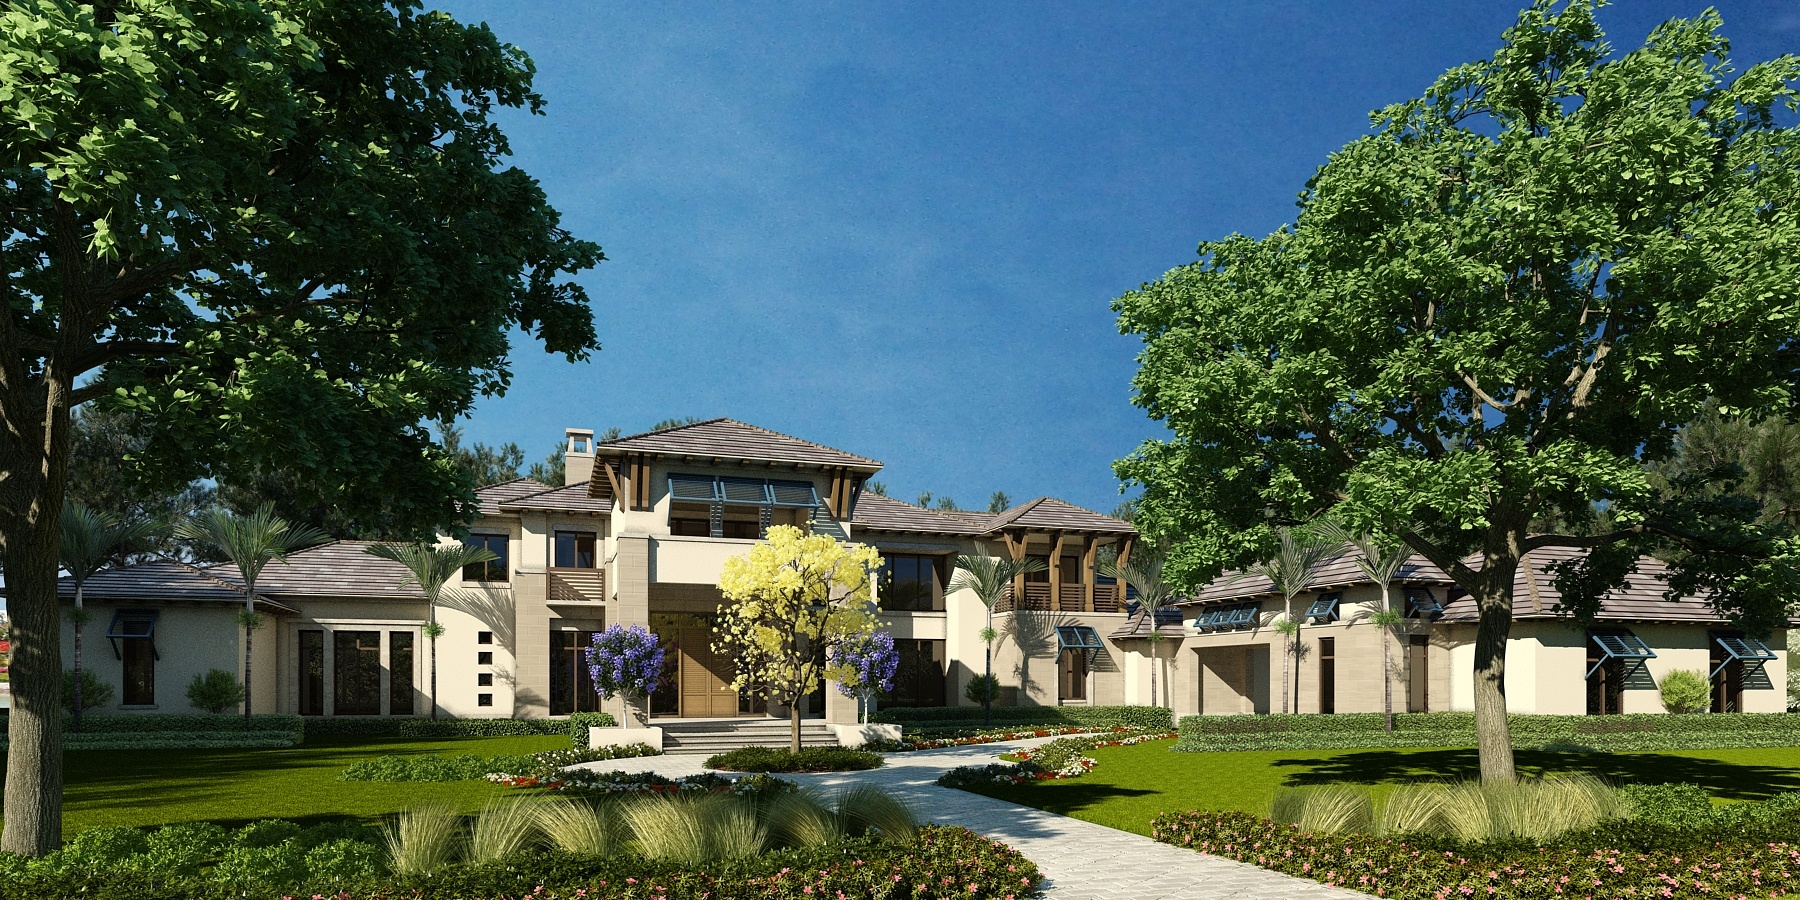 Second grand estate residence to start in Firenze at Talis Park